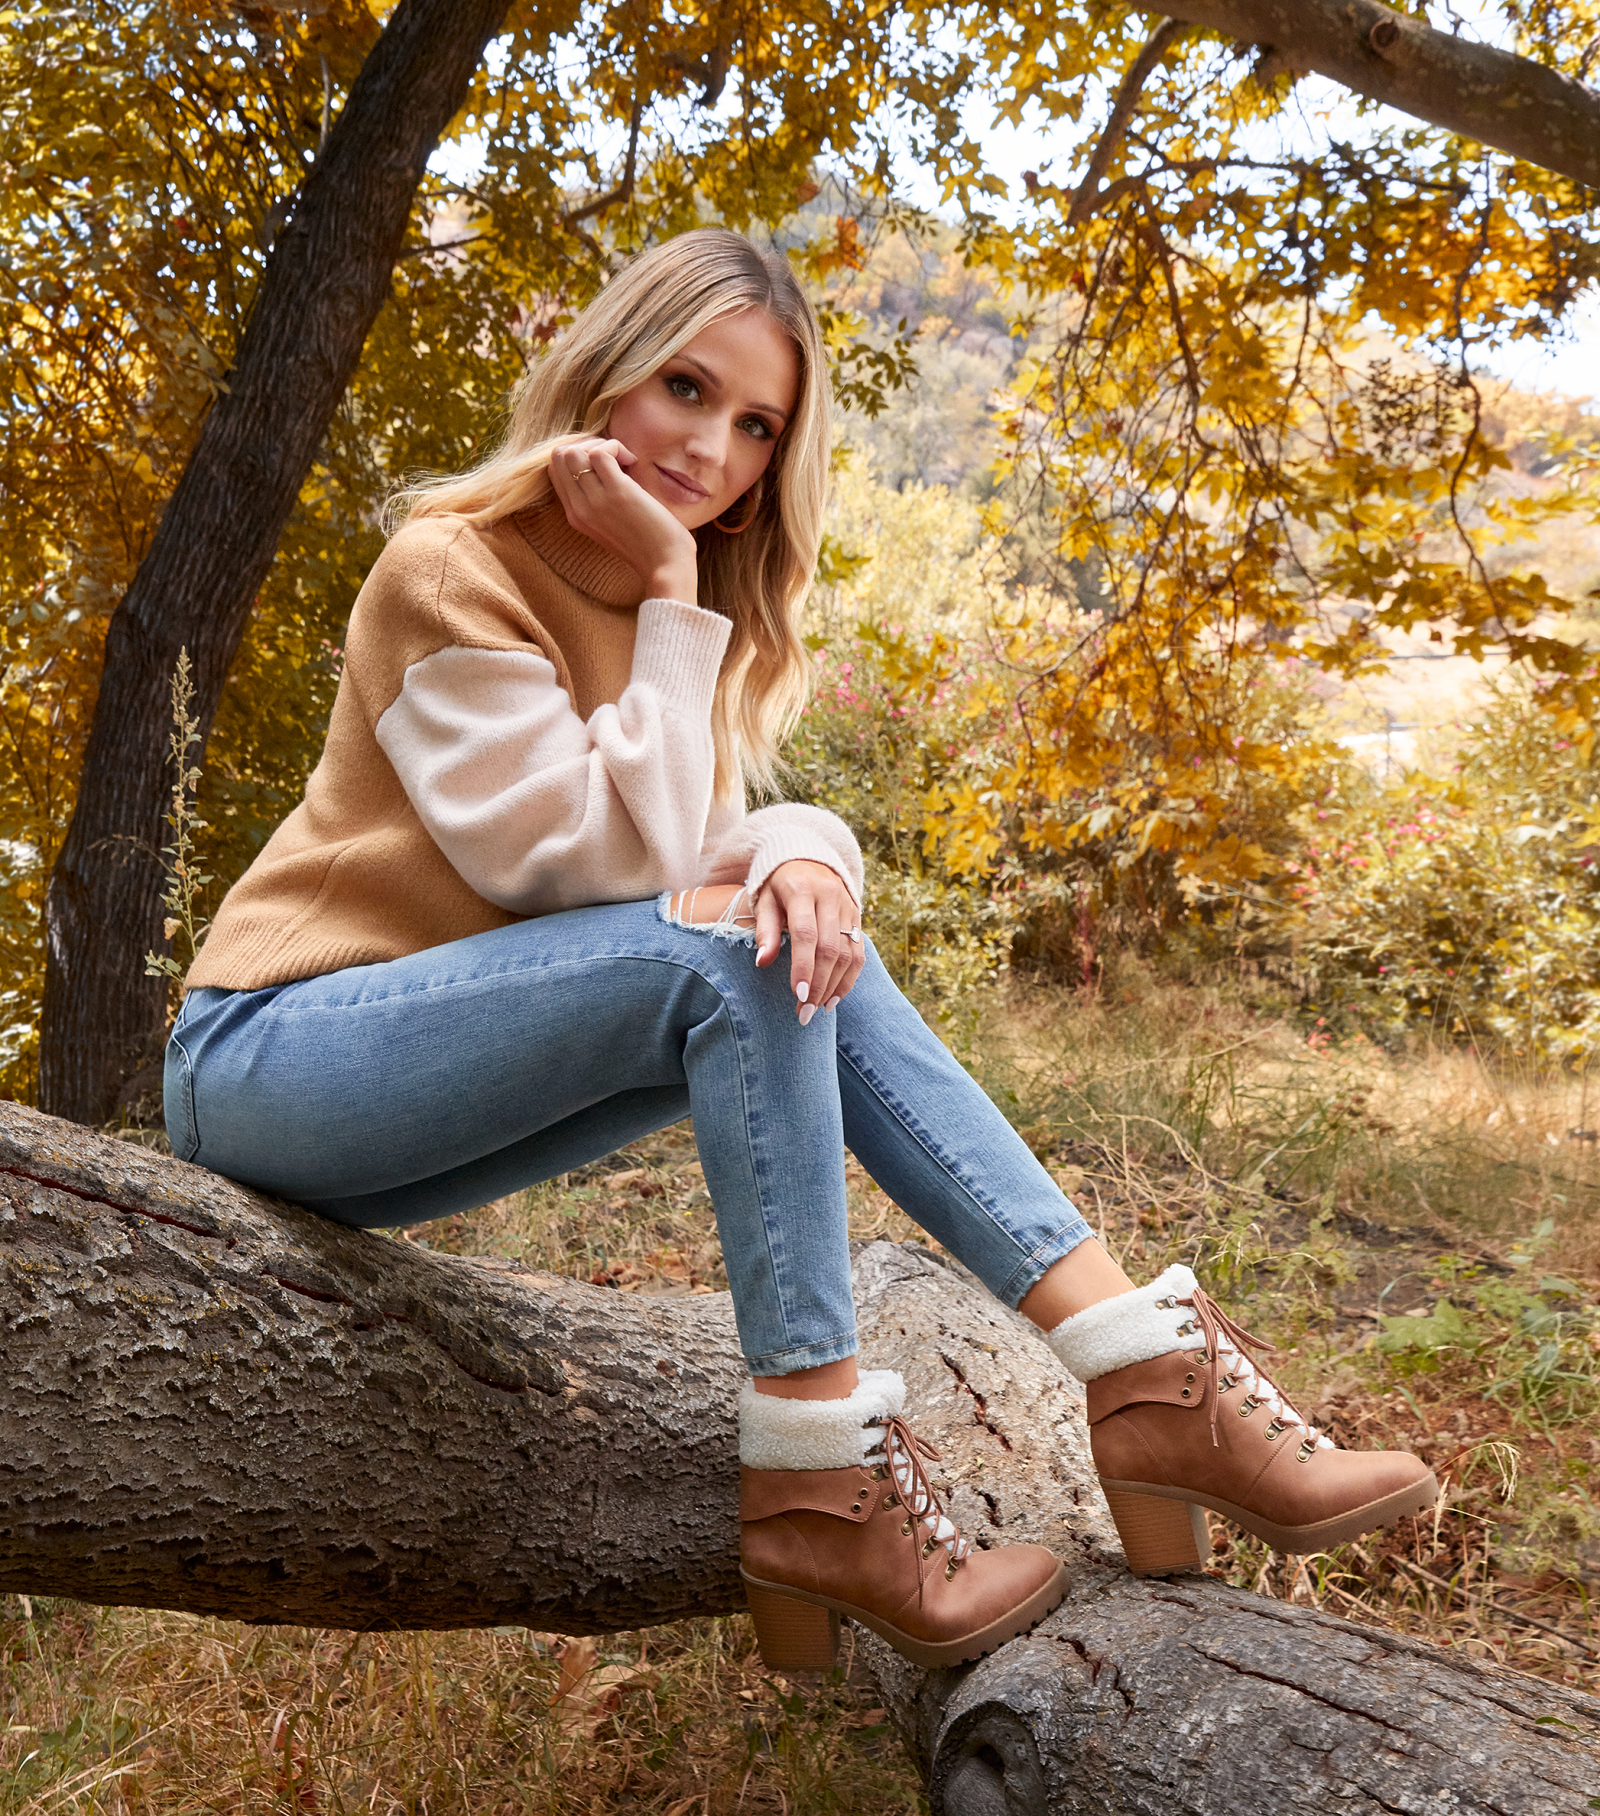 Lauren Bushnell x JustFab Collection - The Brown Ankle Lace-Ups